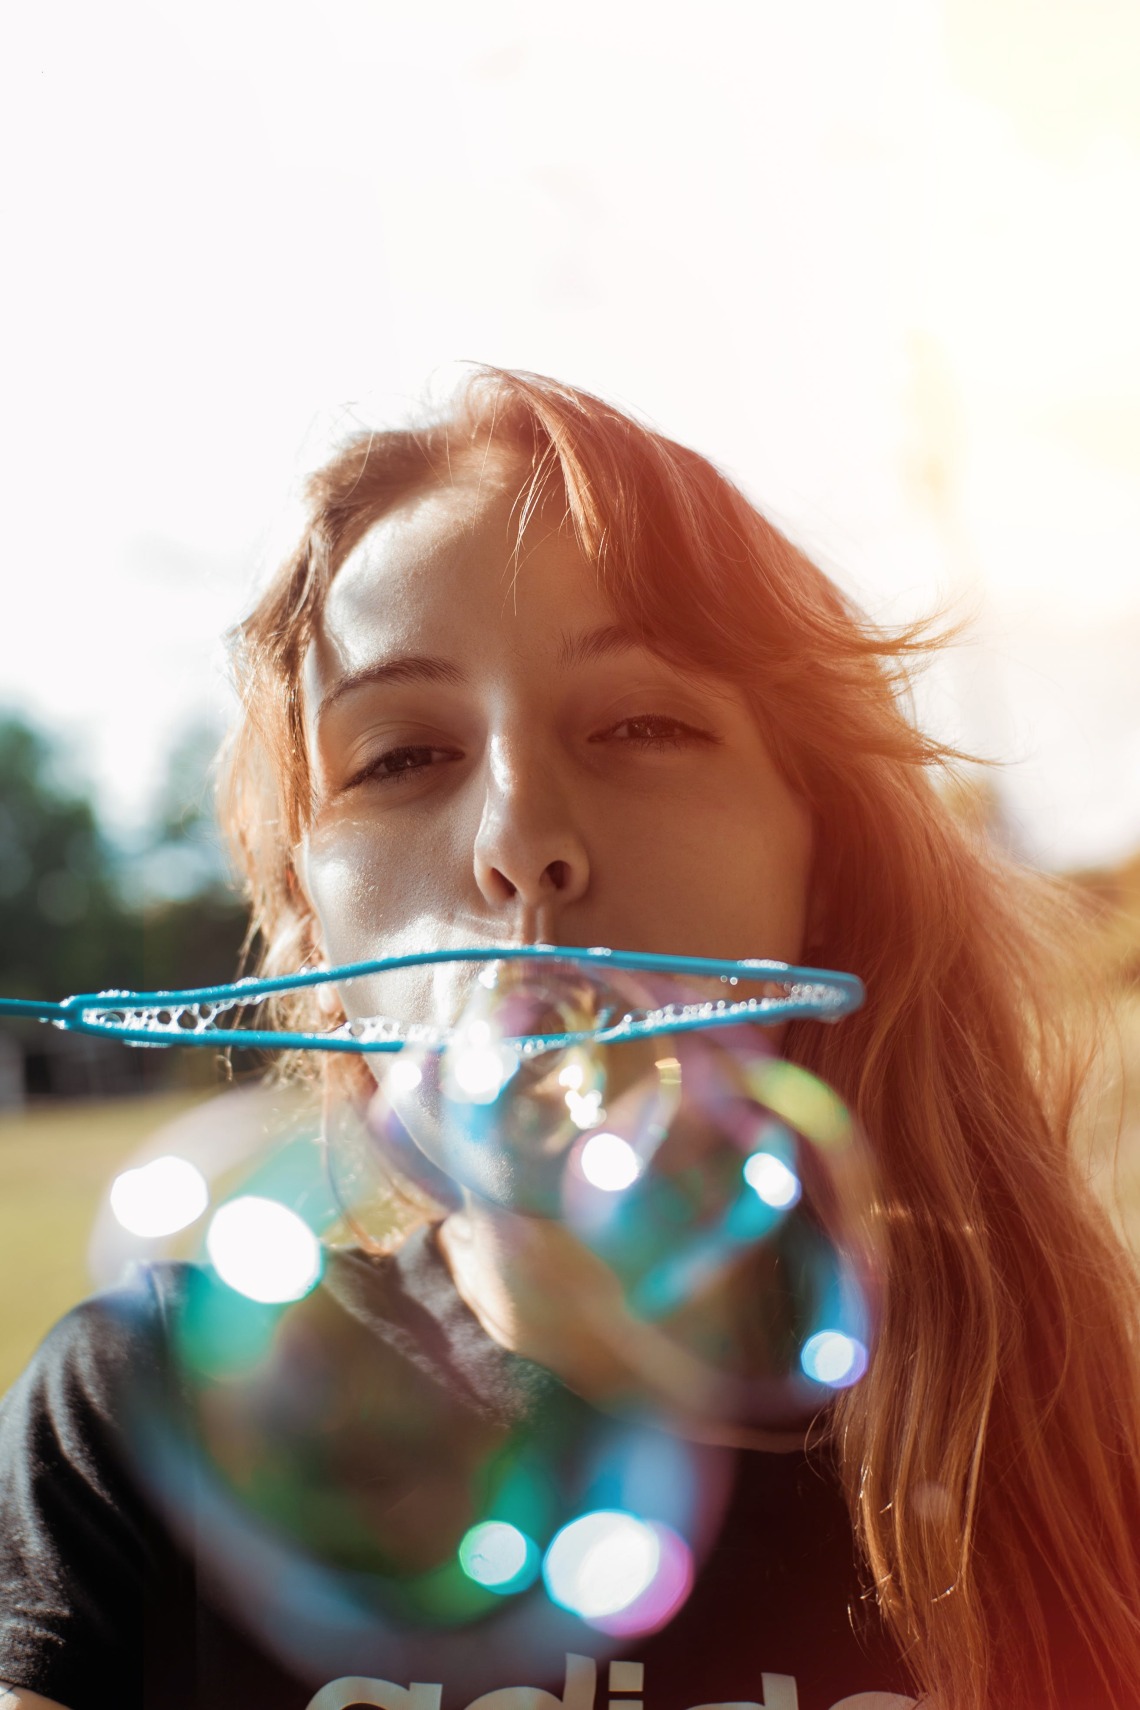 person blowing bubbles with a bubble wand